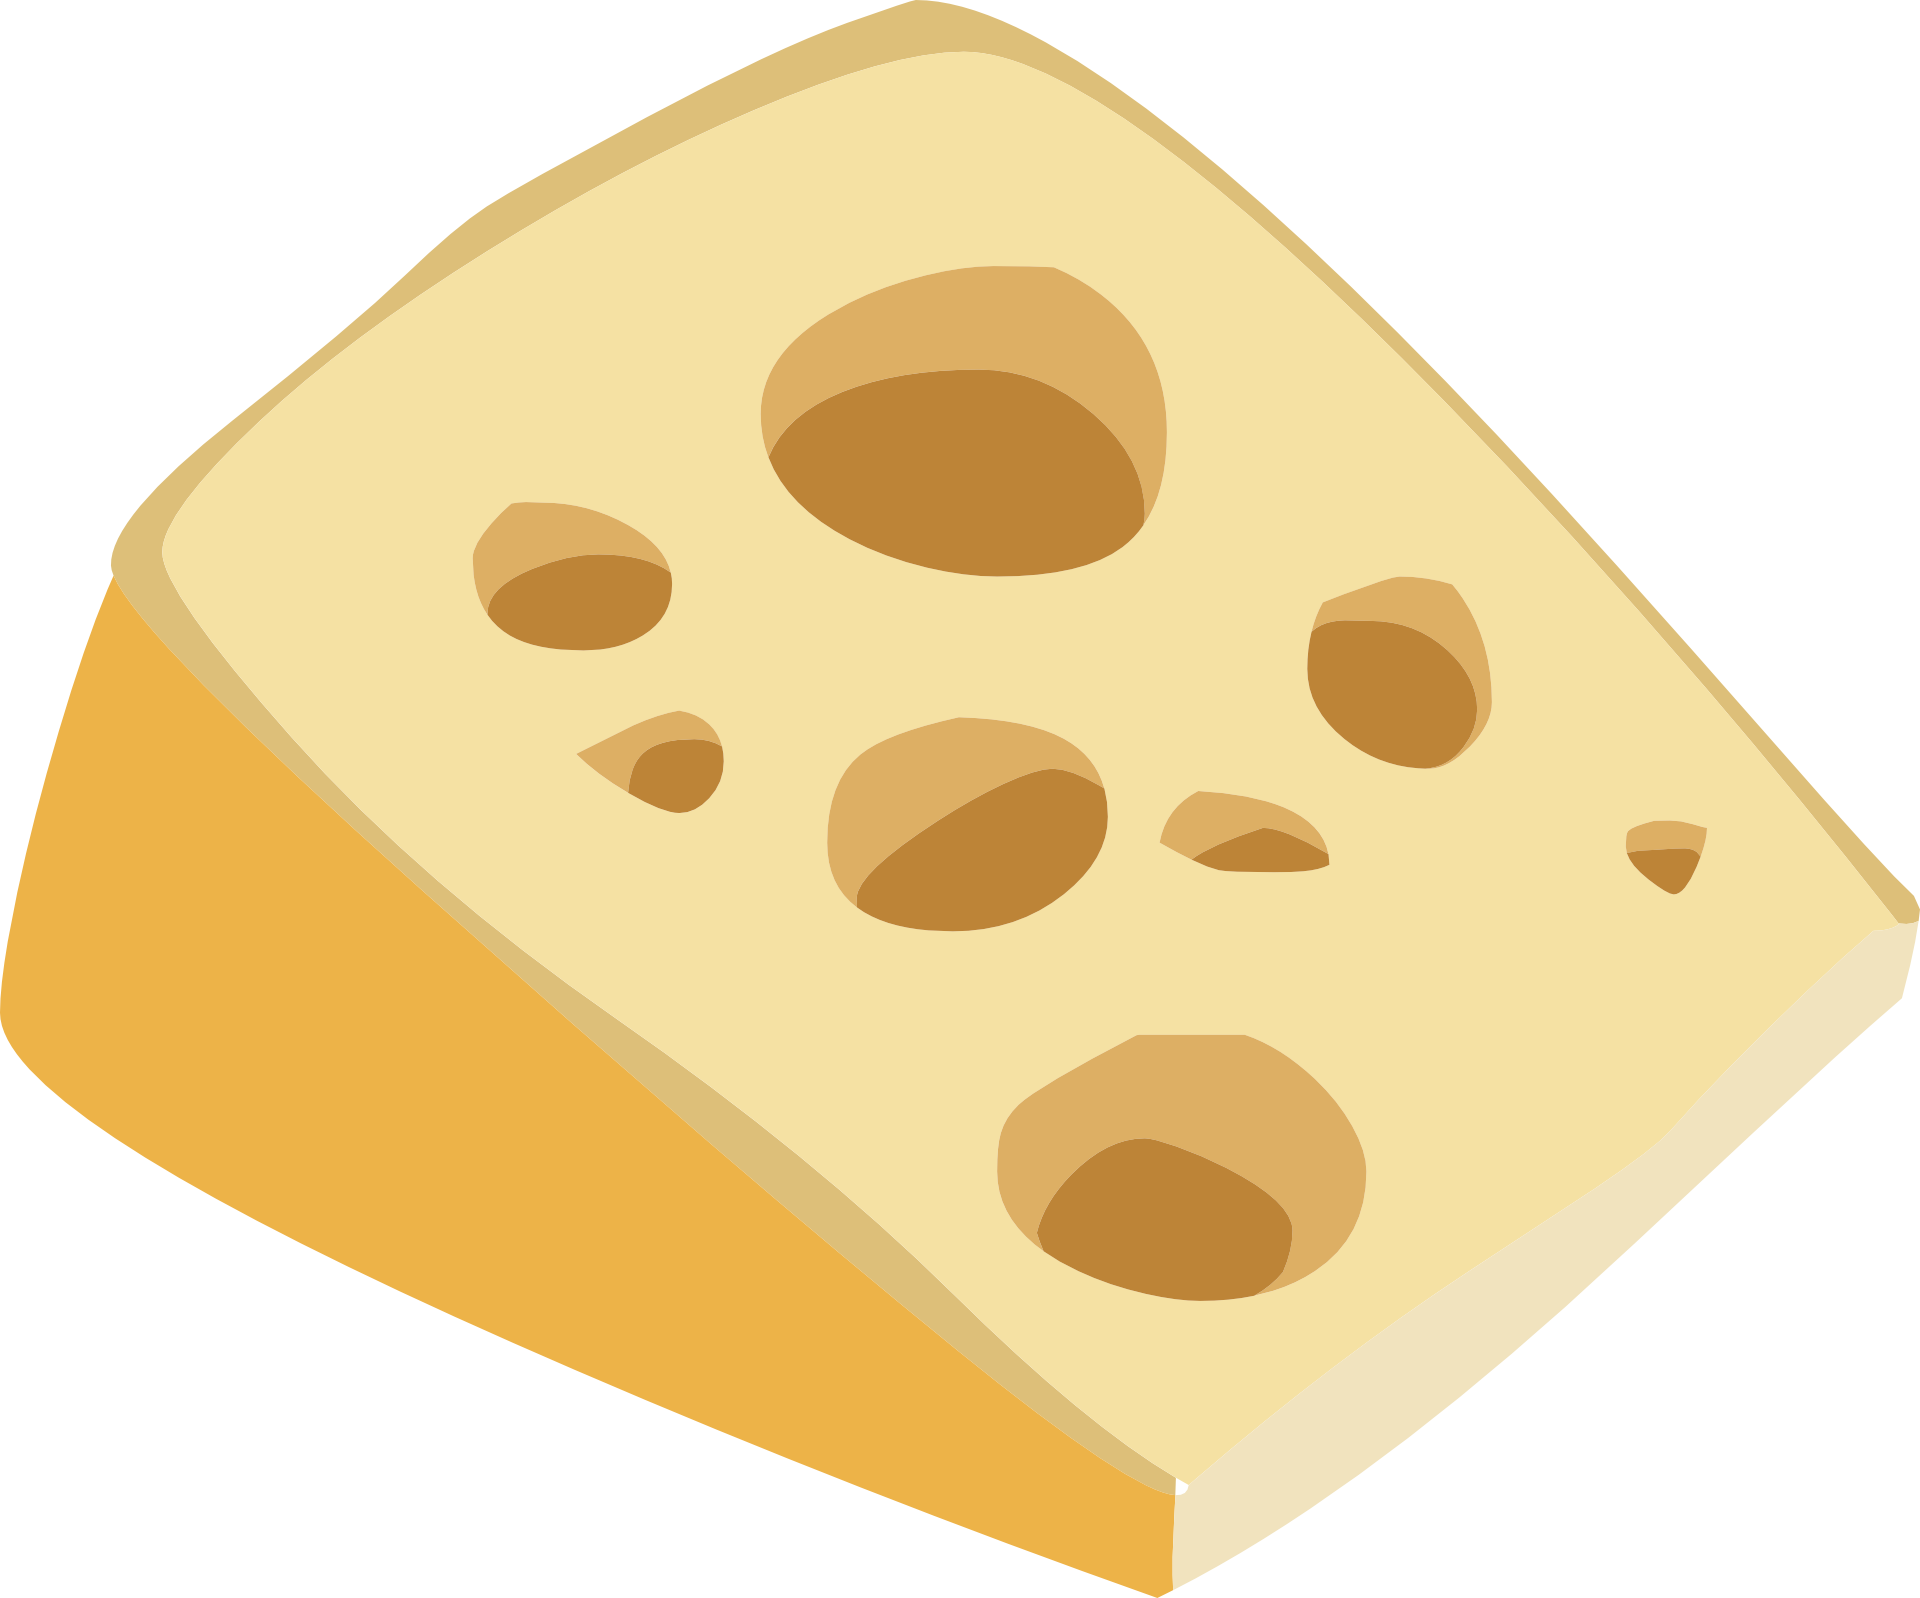 A detailed image of Swiss cheese with a focus on the holes.